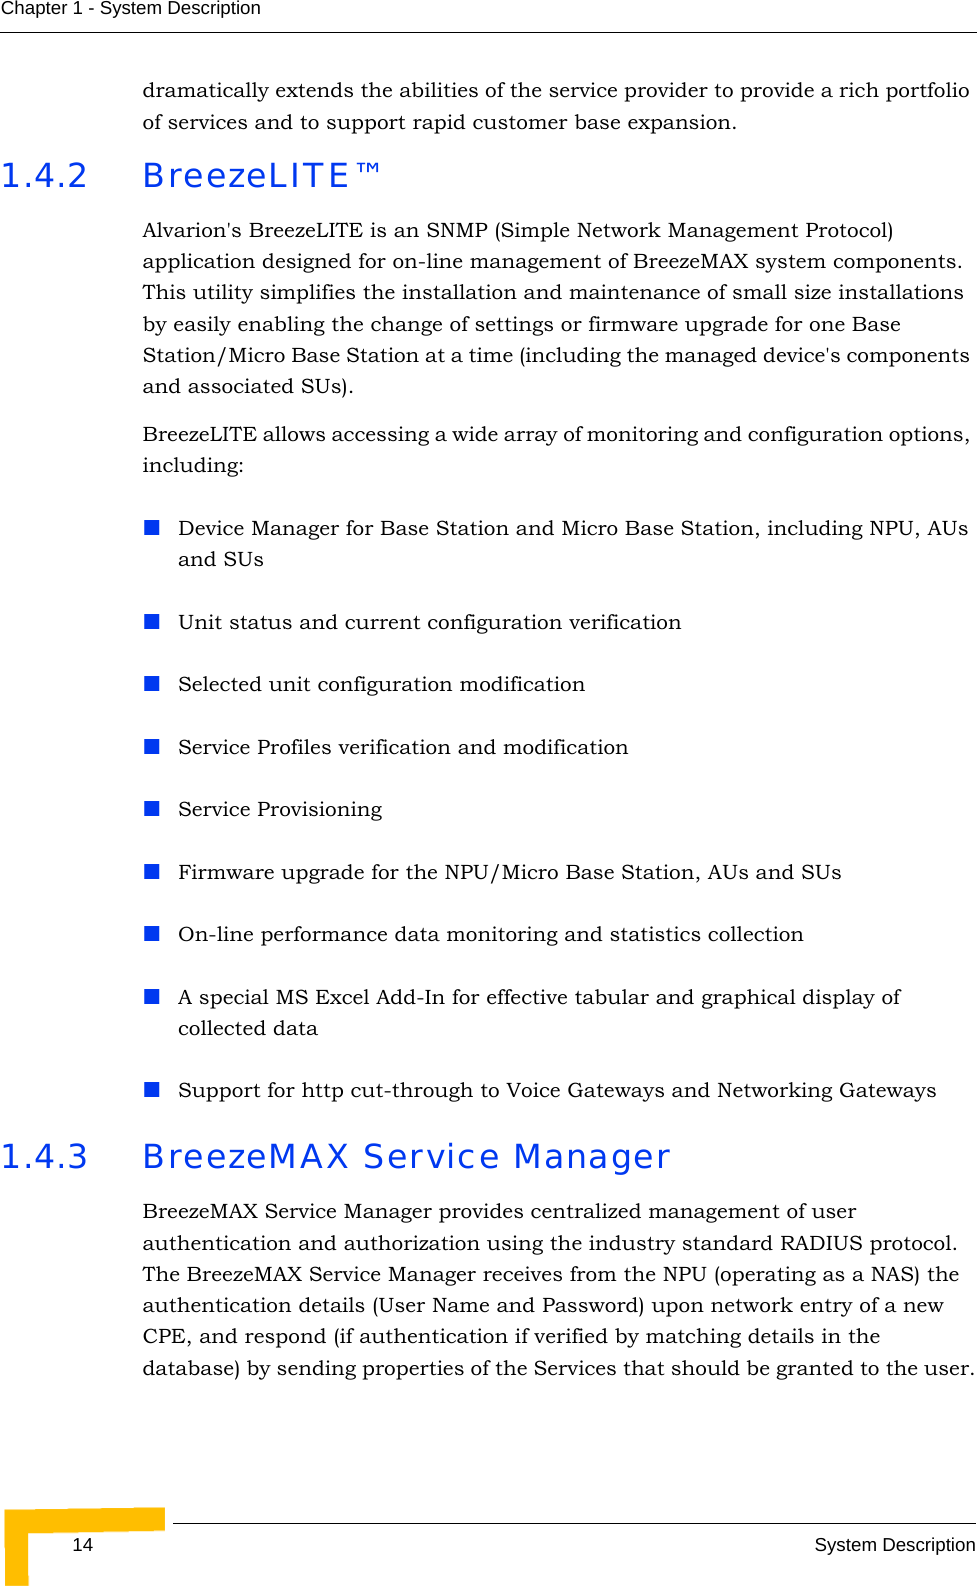 14 System DescriptionChapter 1 - System Descriptiondramatically extends the abilities of the service provider to provide a rich portfolio of services and to support rapid customer base expansion.1.4.2 BreezeLITE™Alvarion&apos;s BreezeLITE is an SNMP (Simple Network Management Protocol) application designed for on-line management of BreezeMAX system components. This utility simplifies the installation and maintenance of small size installations by easily enabling the change of settings or firmware upgrade for one Base Station/Micro Base Station at a time (including the managed device&apos;s components and associated SUs).BreezeLITE allows accessing a wide array of monitoring and configuration options, including:Device Manager for Base Station and Micro Base Station, including NPU, AUs and SUsUnit status and current configuration verificationSelected unit configuration modificationService Profiles verification and modificationService ProvisioningFirmware upgrade for the NPU/Micro Base Station, AUs and SUsOn-line performance data monitoring and statistics collectionA special MS Excel Add-In for effective tabular and graphical display of collected dataSupport for http cut-through to Voice Gateways and Networking Gateways1.4.3 BreezeMAX Service ManagerBreezeMAX Service Manager provides centralized management of user authentication and authorization using the industry standard RADIUS protocol. The BreezeMAX Service Manager receives from the NPU (operating as a NAS) the authentication details (User Name and Password) upon network entry of a new CPE, and respond (if authentication if verified by matching details in the database) by sending properties of the Services that should be granted to the user.